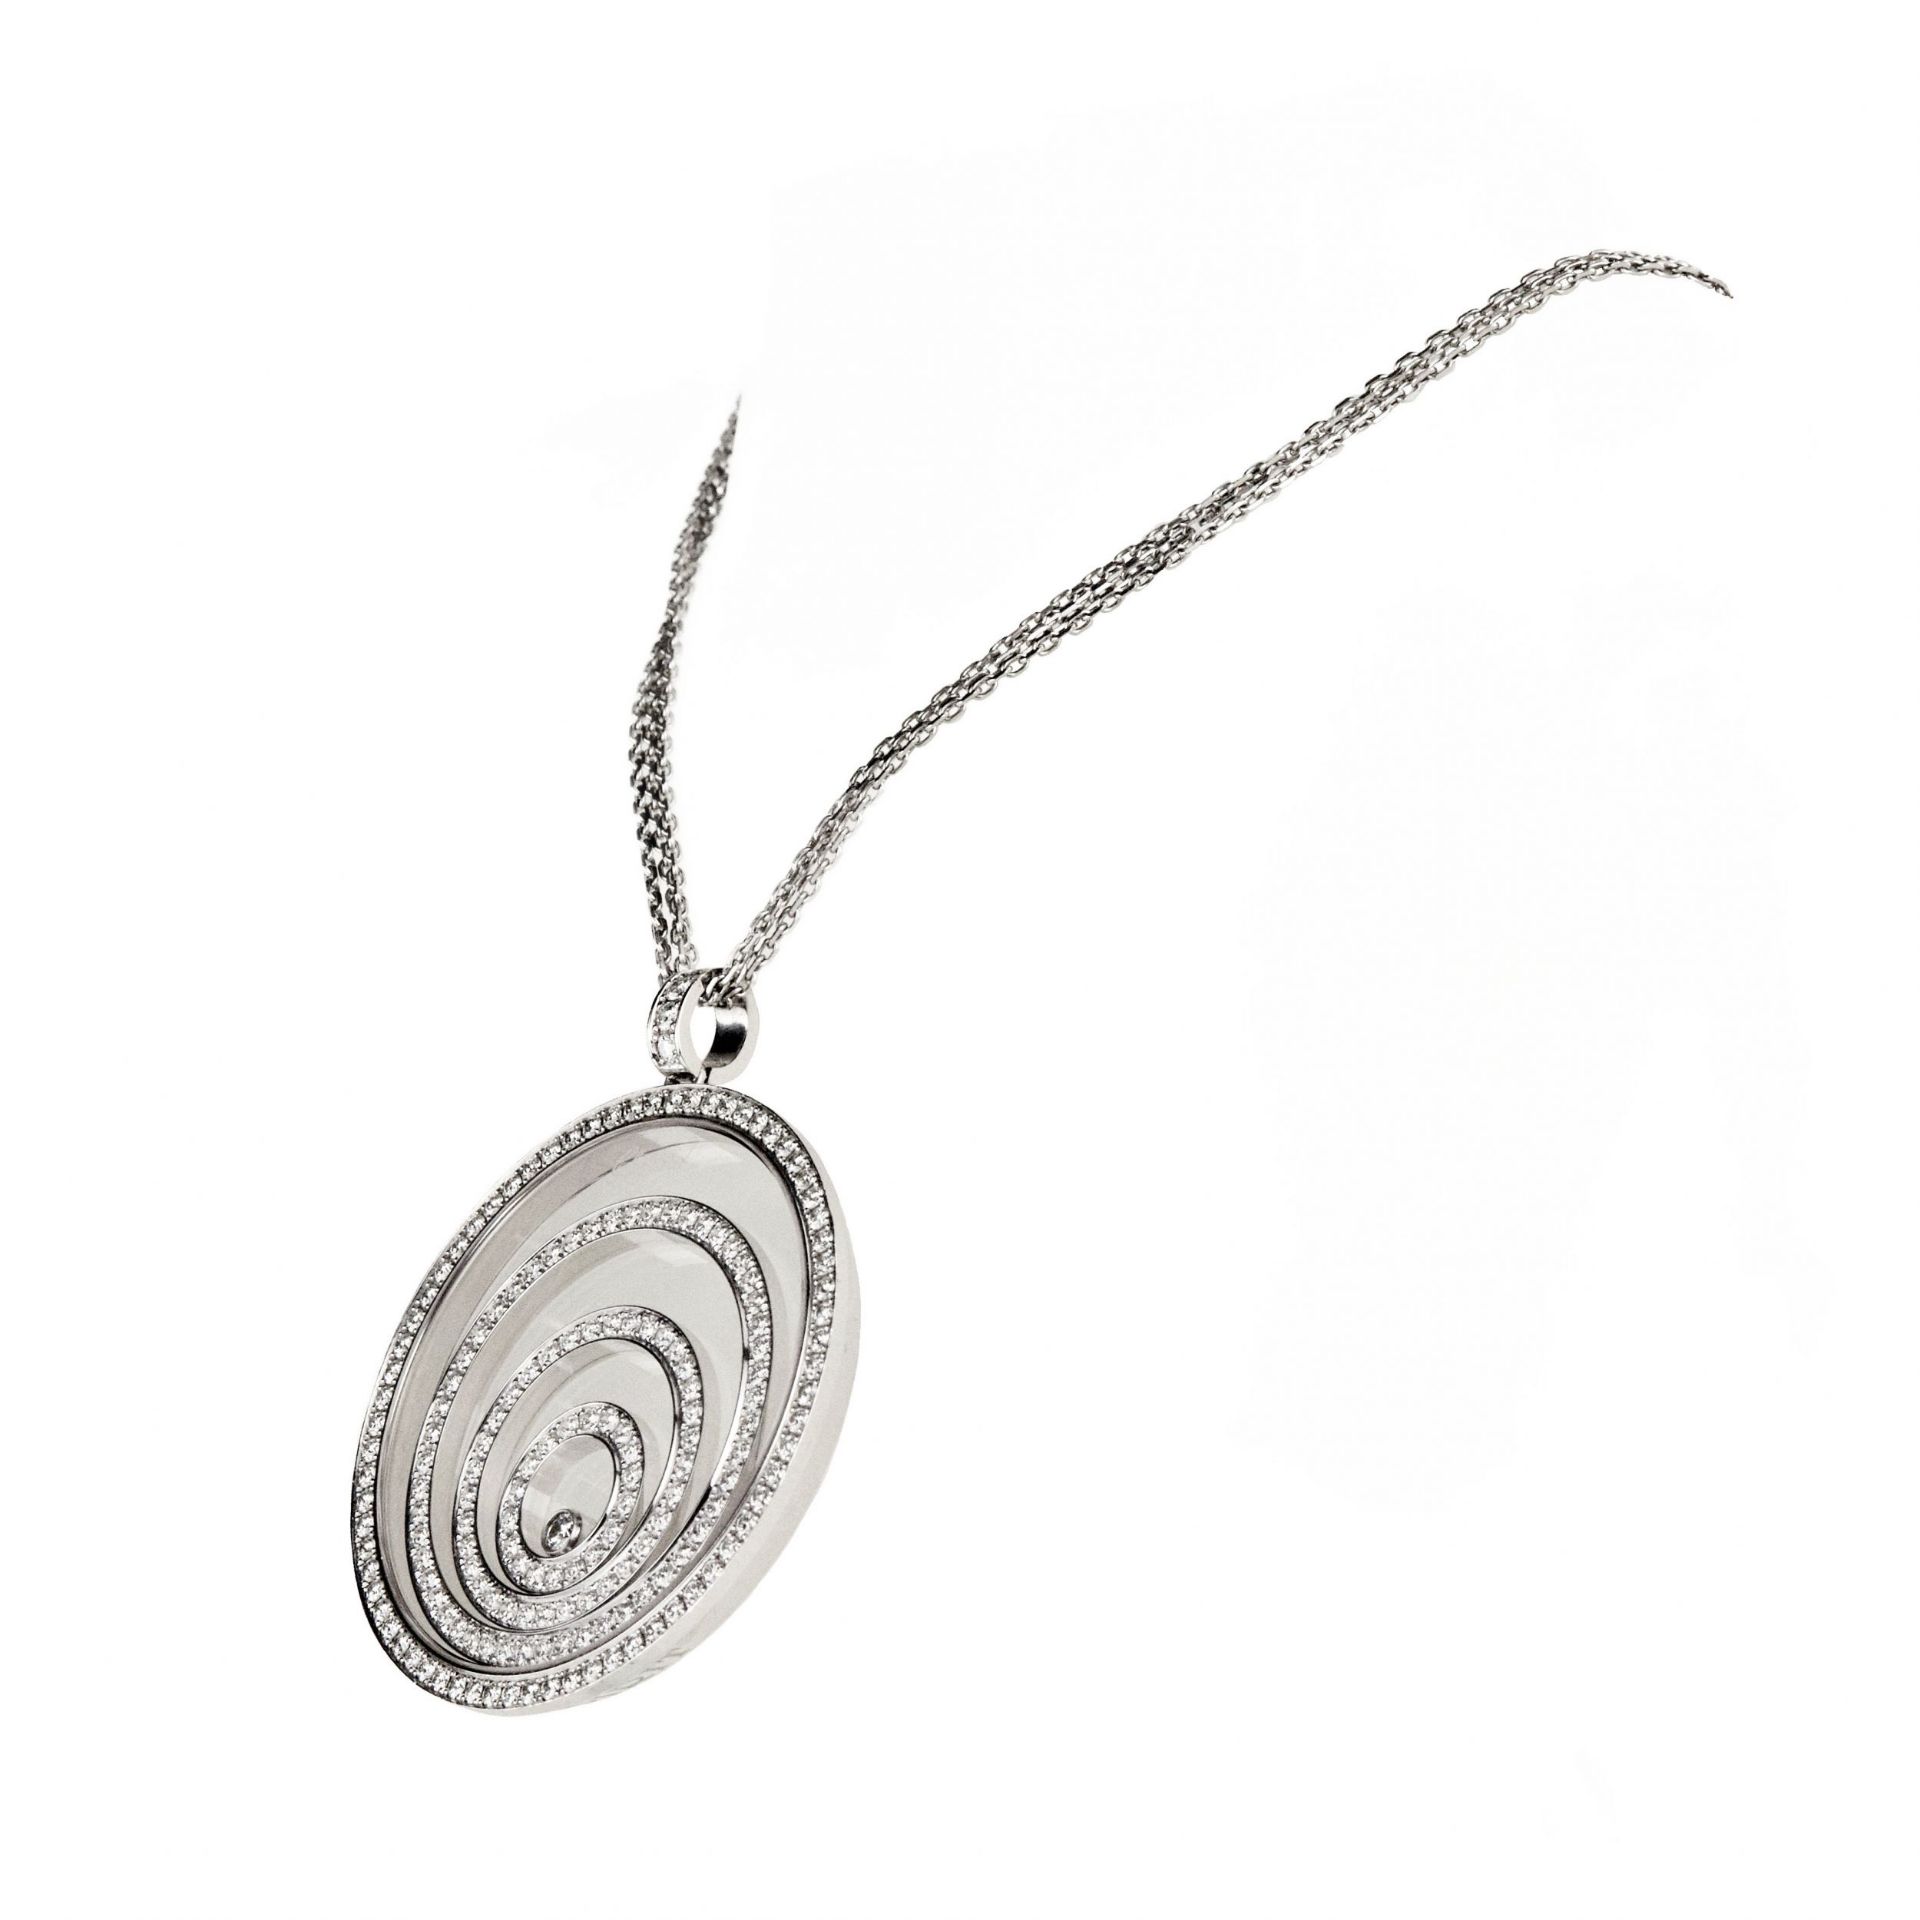 Chopard white gold pendant with diamonds. - Image 2 of 10